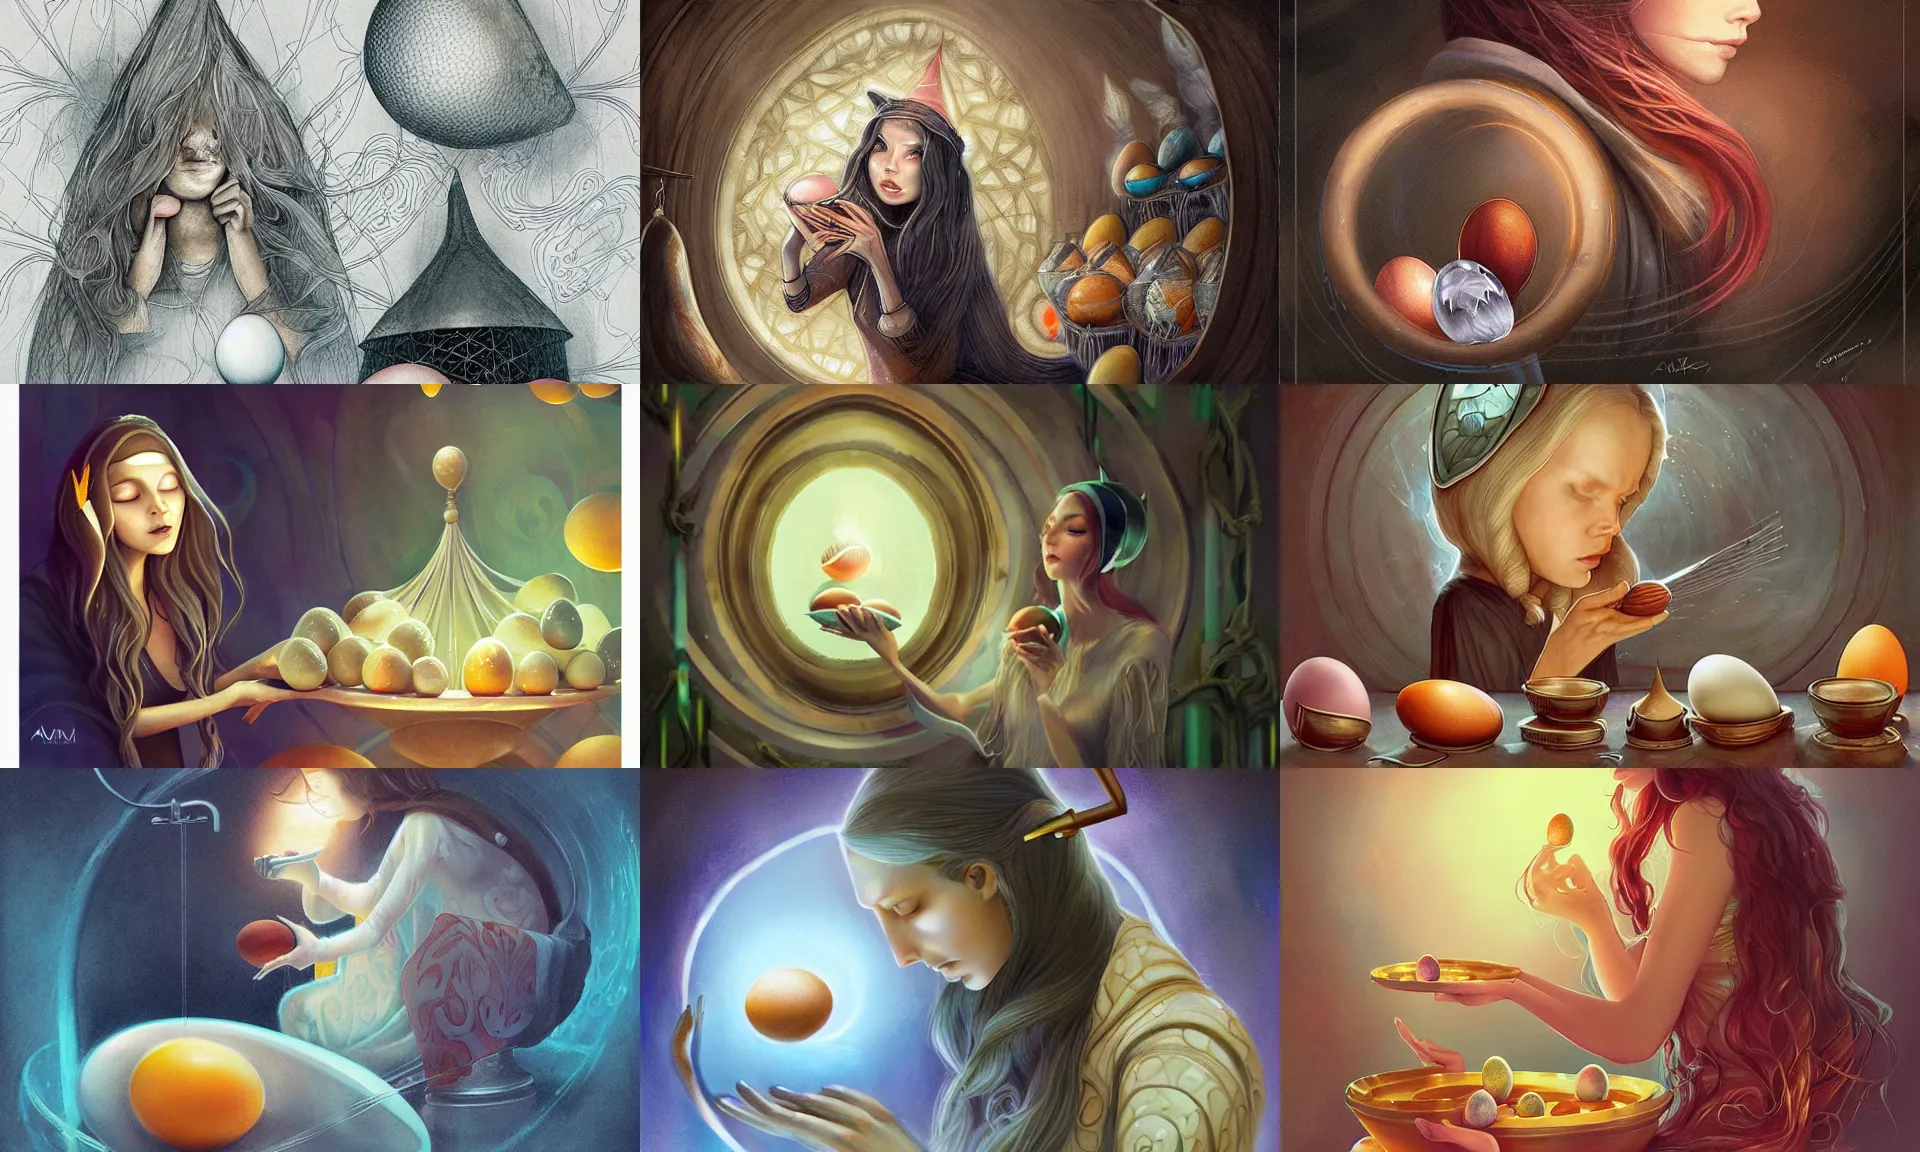 Prompt: Pensive Wizard examines eggs with calipers, by Anna Dittman